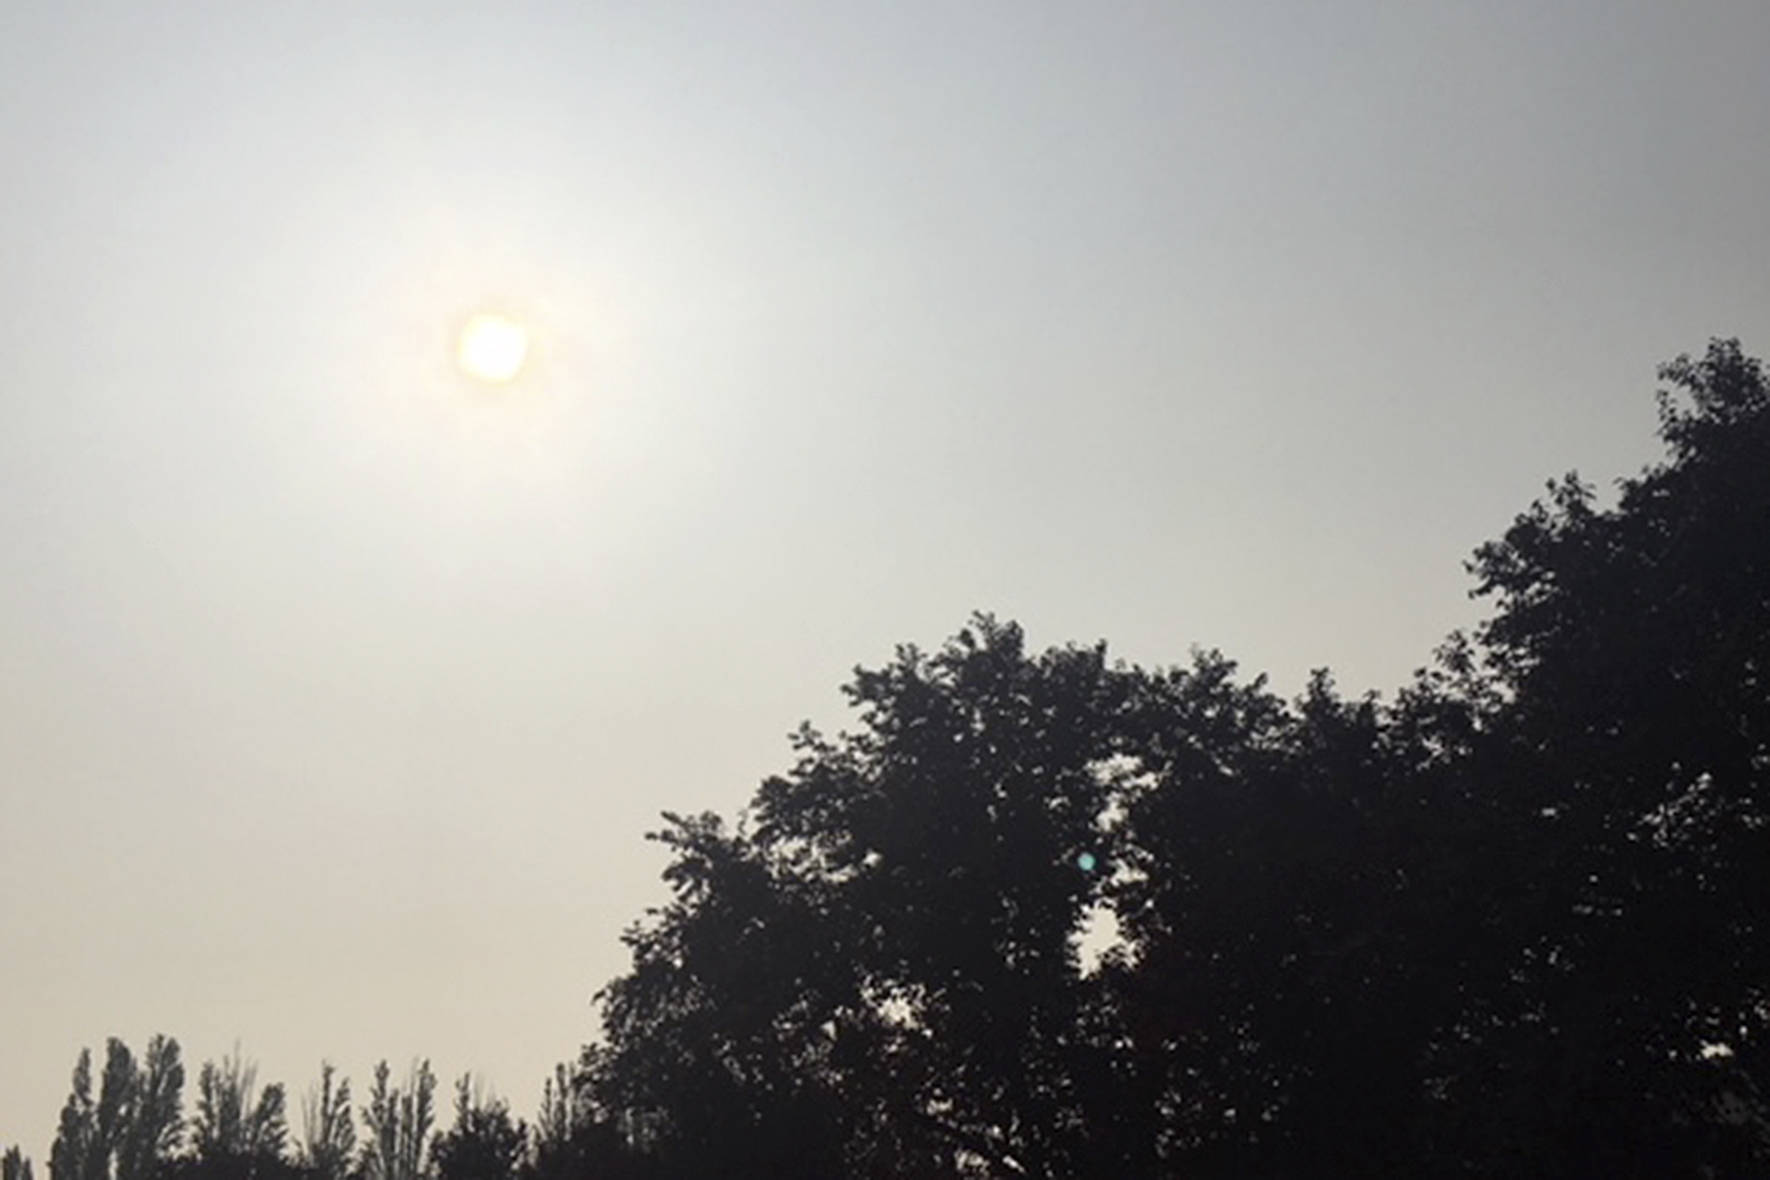 Wildfire smoke fills the sky Aug. 15 while temperatures remain in the high 80s to low 90s. Photo by Sarah Brenden.